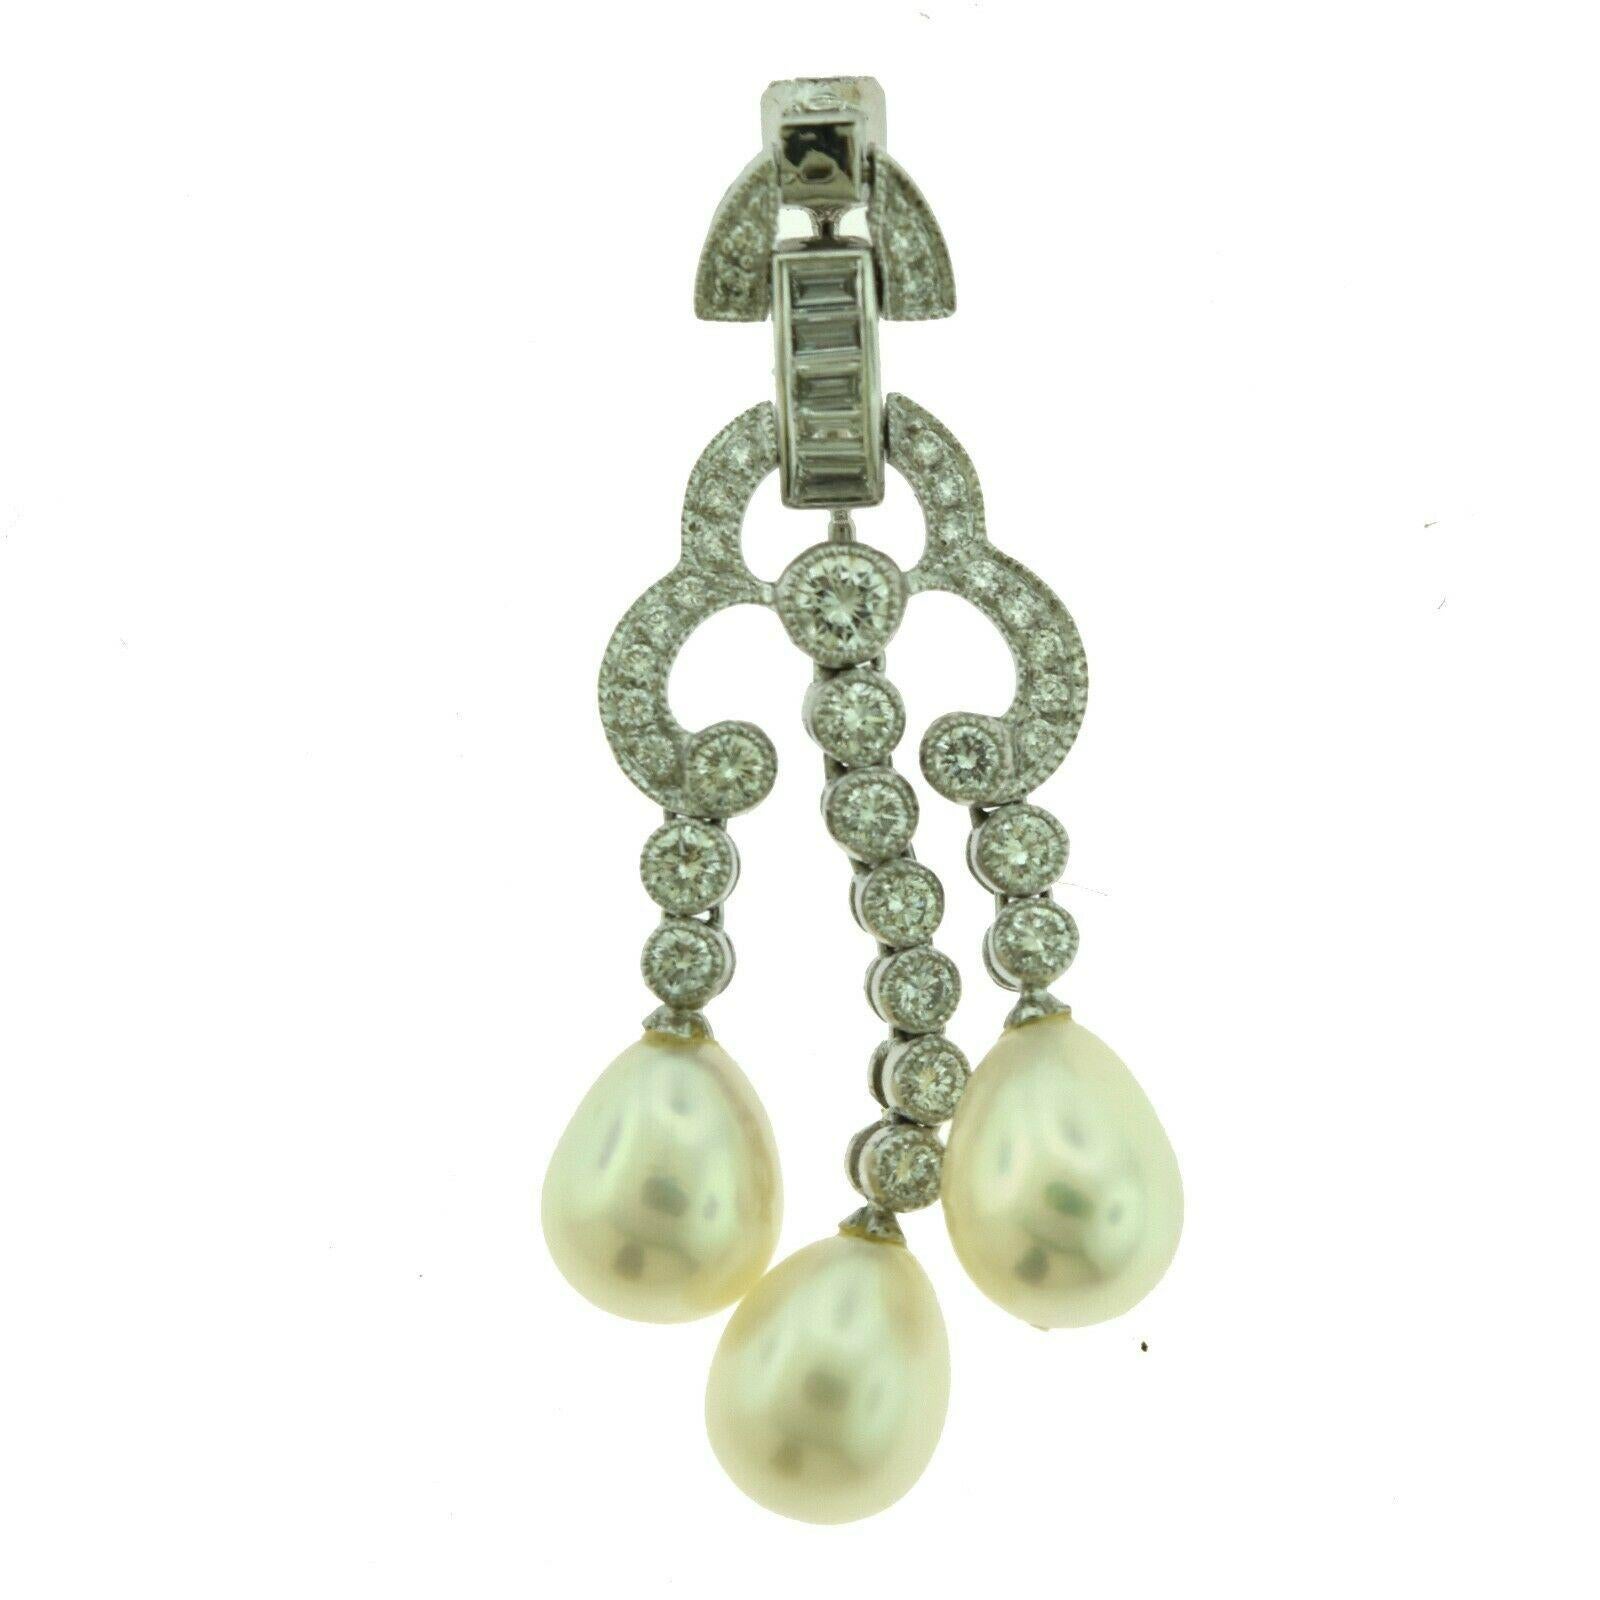 Brilliance Jewels, Miami
Questions? Call Us Anytime!
786,482,8100

Style: Art Deco Estate Drop Dangle Earrings

Metal Type: Platinum

Metal Purity: 950

Stones:  6 Pearls (3 each earring)

                    Round and Baguette Diamonds

Diamond